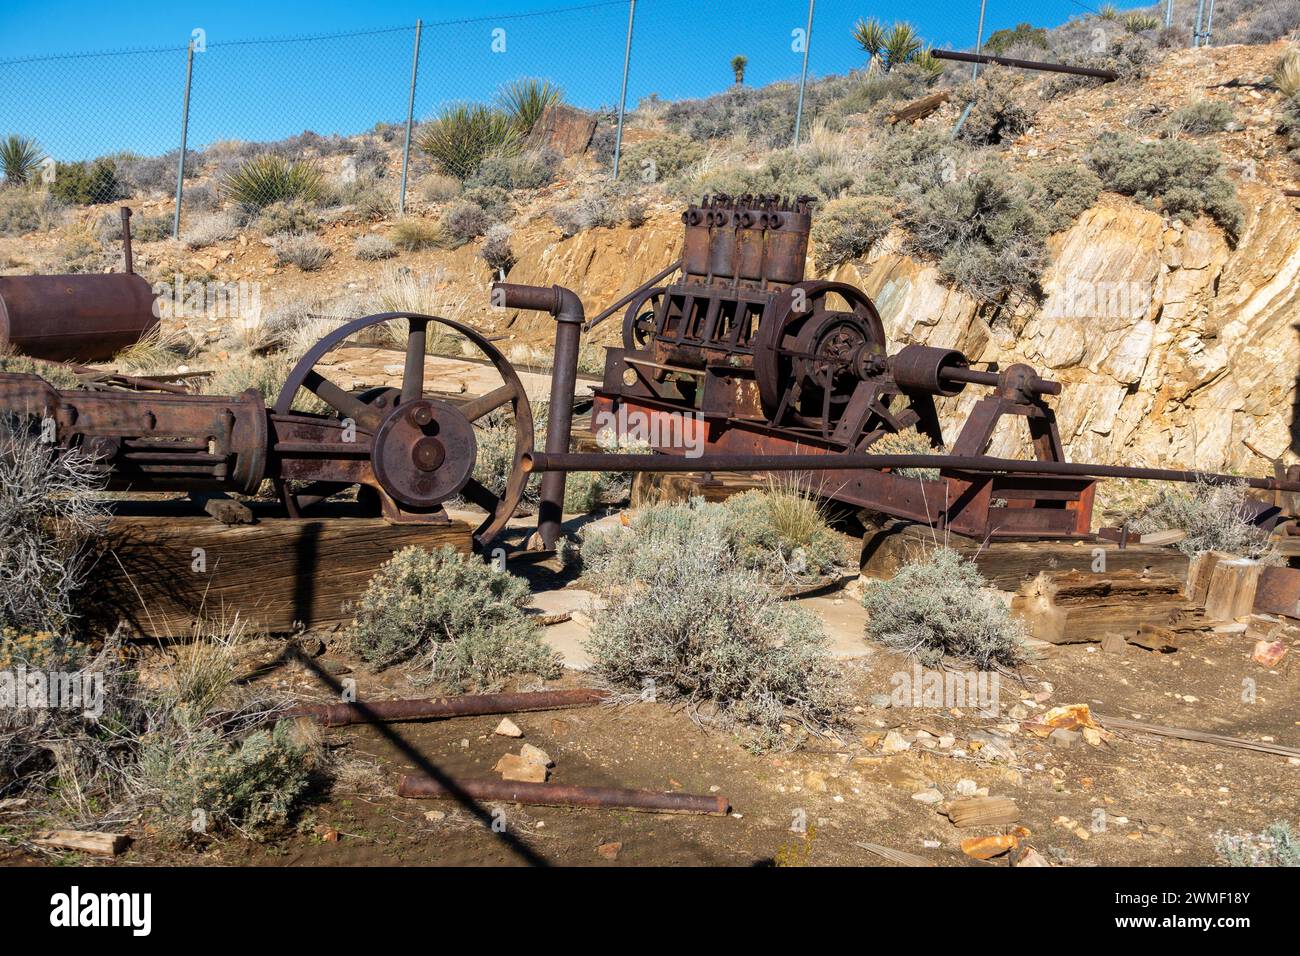 Famous Lost Horse Gold and Silver Mine Platform, Rust Colored Industrial Machine Equipment Junkyard. Joshua Tree National Park California Southwest US Stock Photo